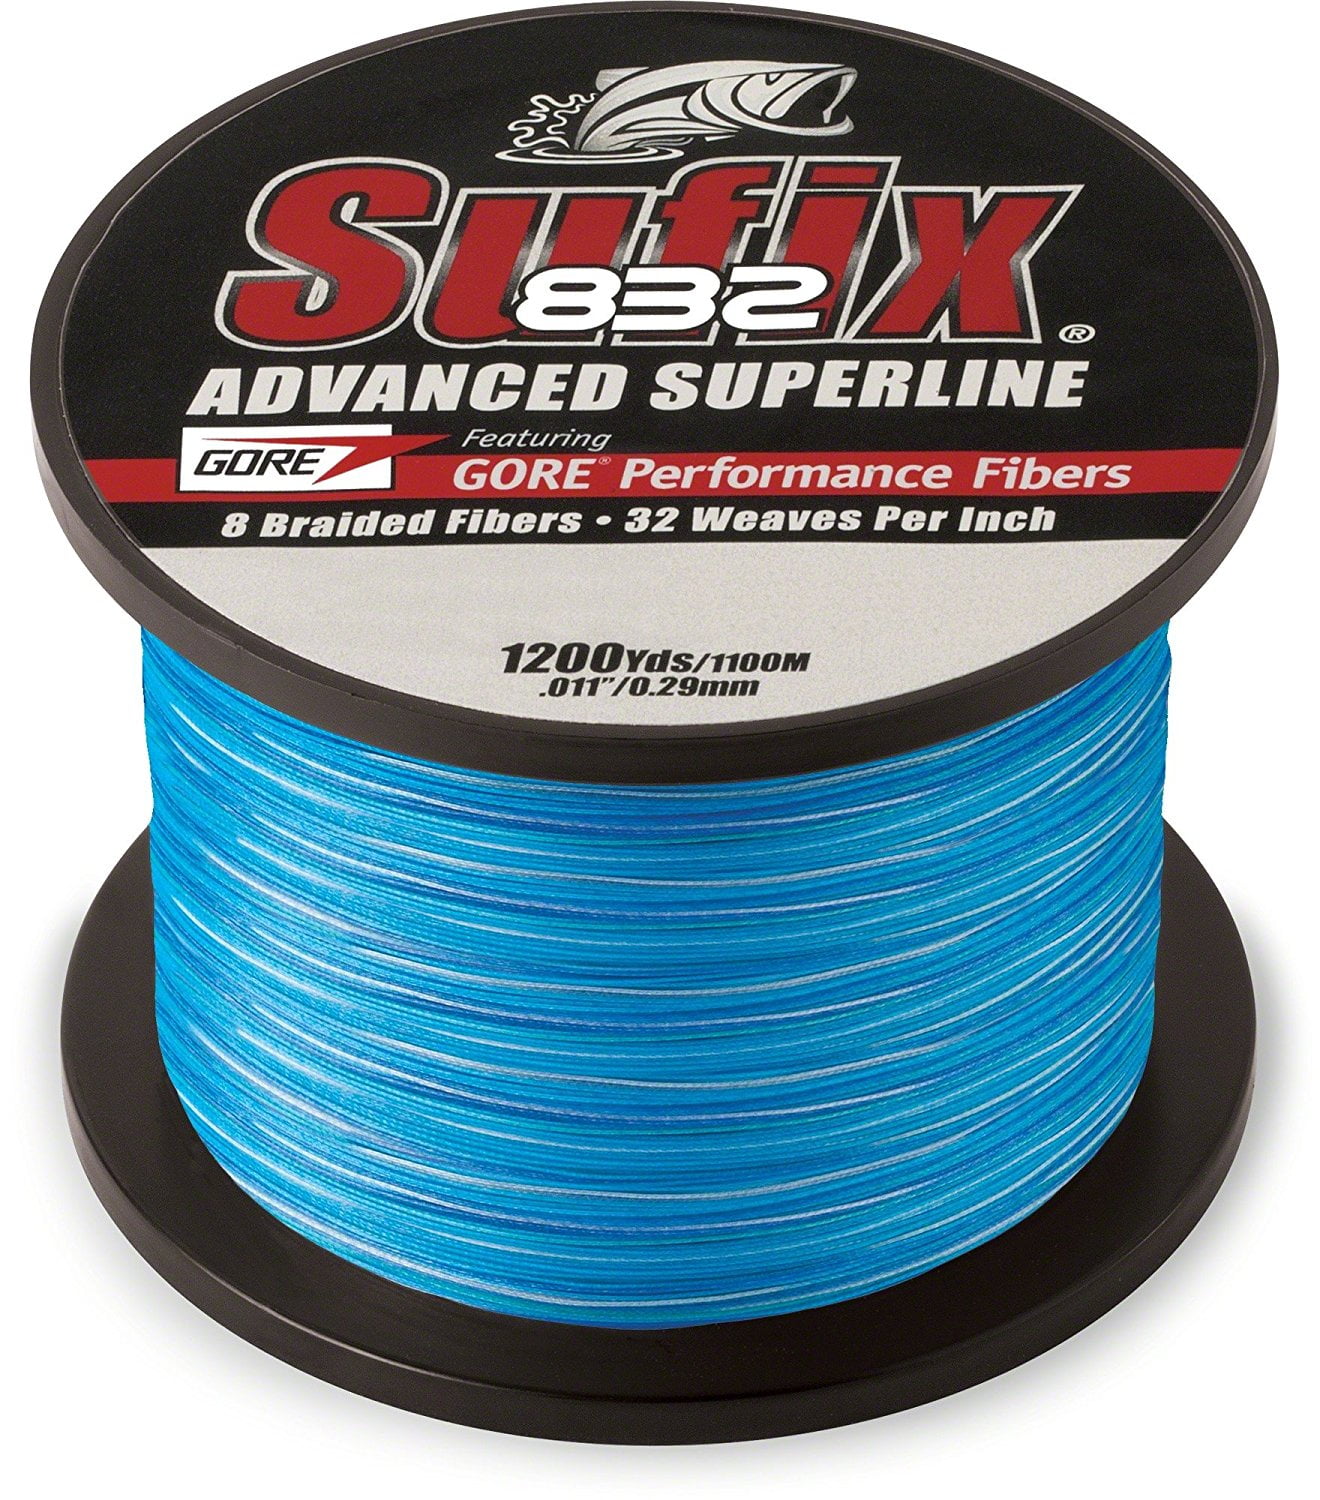 Sufix 832 Advanced Superline Ghost White 300yd 50lb Test Fishing Line 660-150GH 